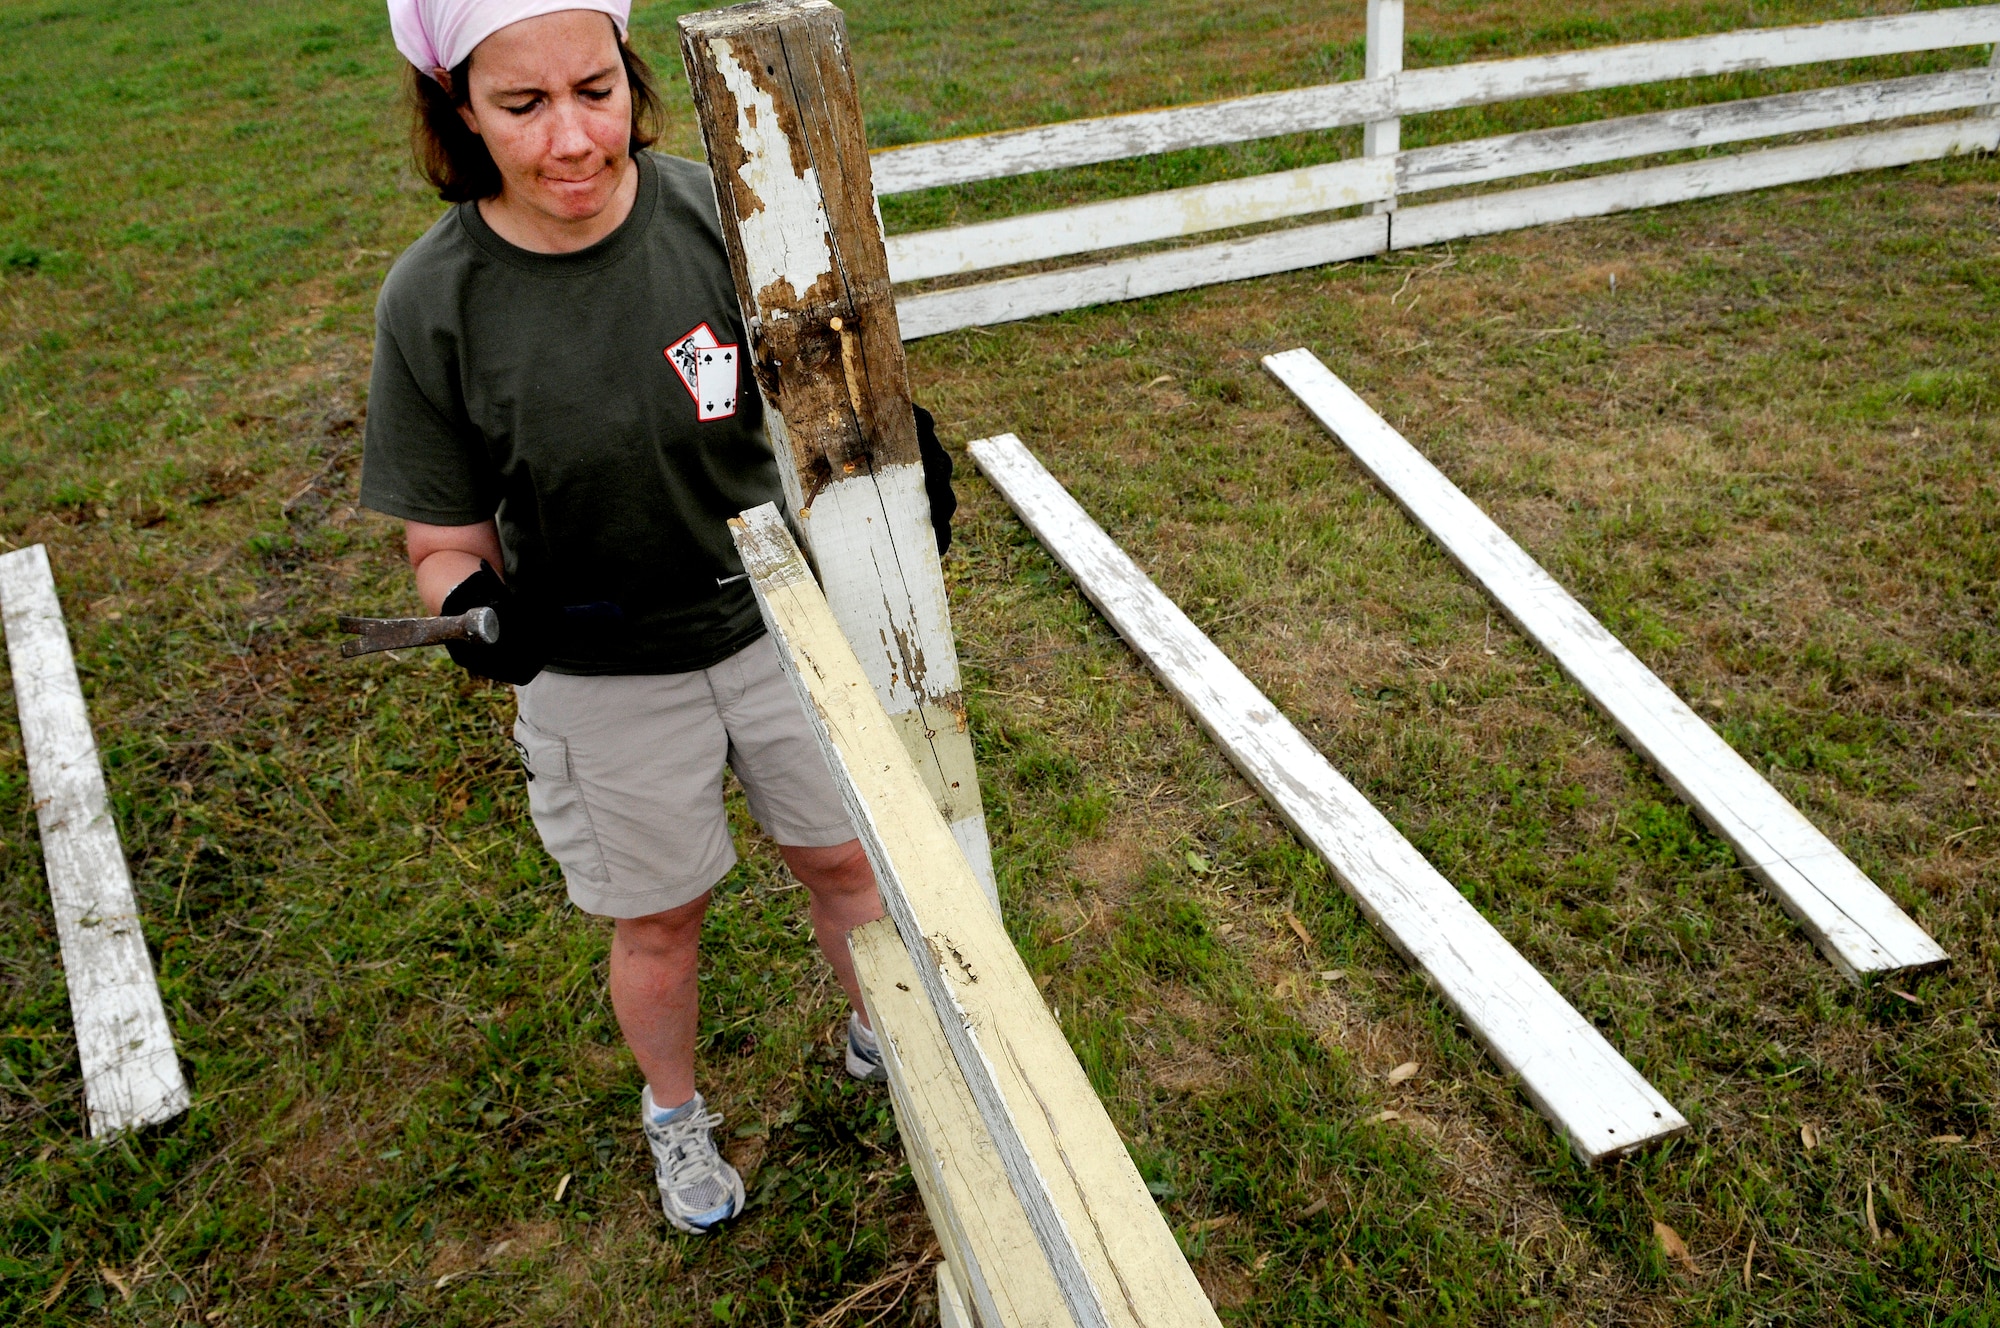 Jennifer Fletcher, 39th Air Base Wing, nails a board into a fence post at the base dog park April 21, 2012, at Incirlik Air Base, Turkey. Twelve volunteers spent five hours gathering trash and debris, mending fences, and mowing to provide a place for the base's furry residents to play. (U.S. Air Force photo by Staff Sgt. Kali L. Gradishar/Released)